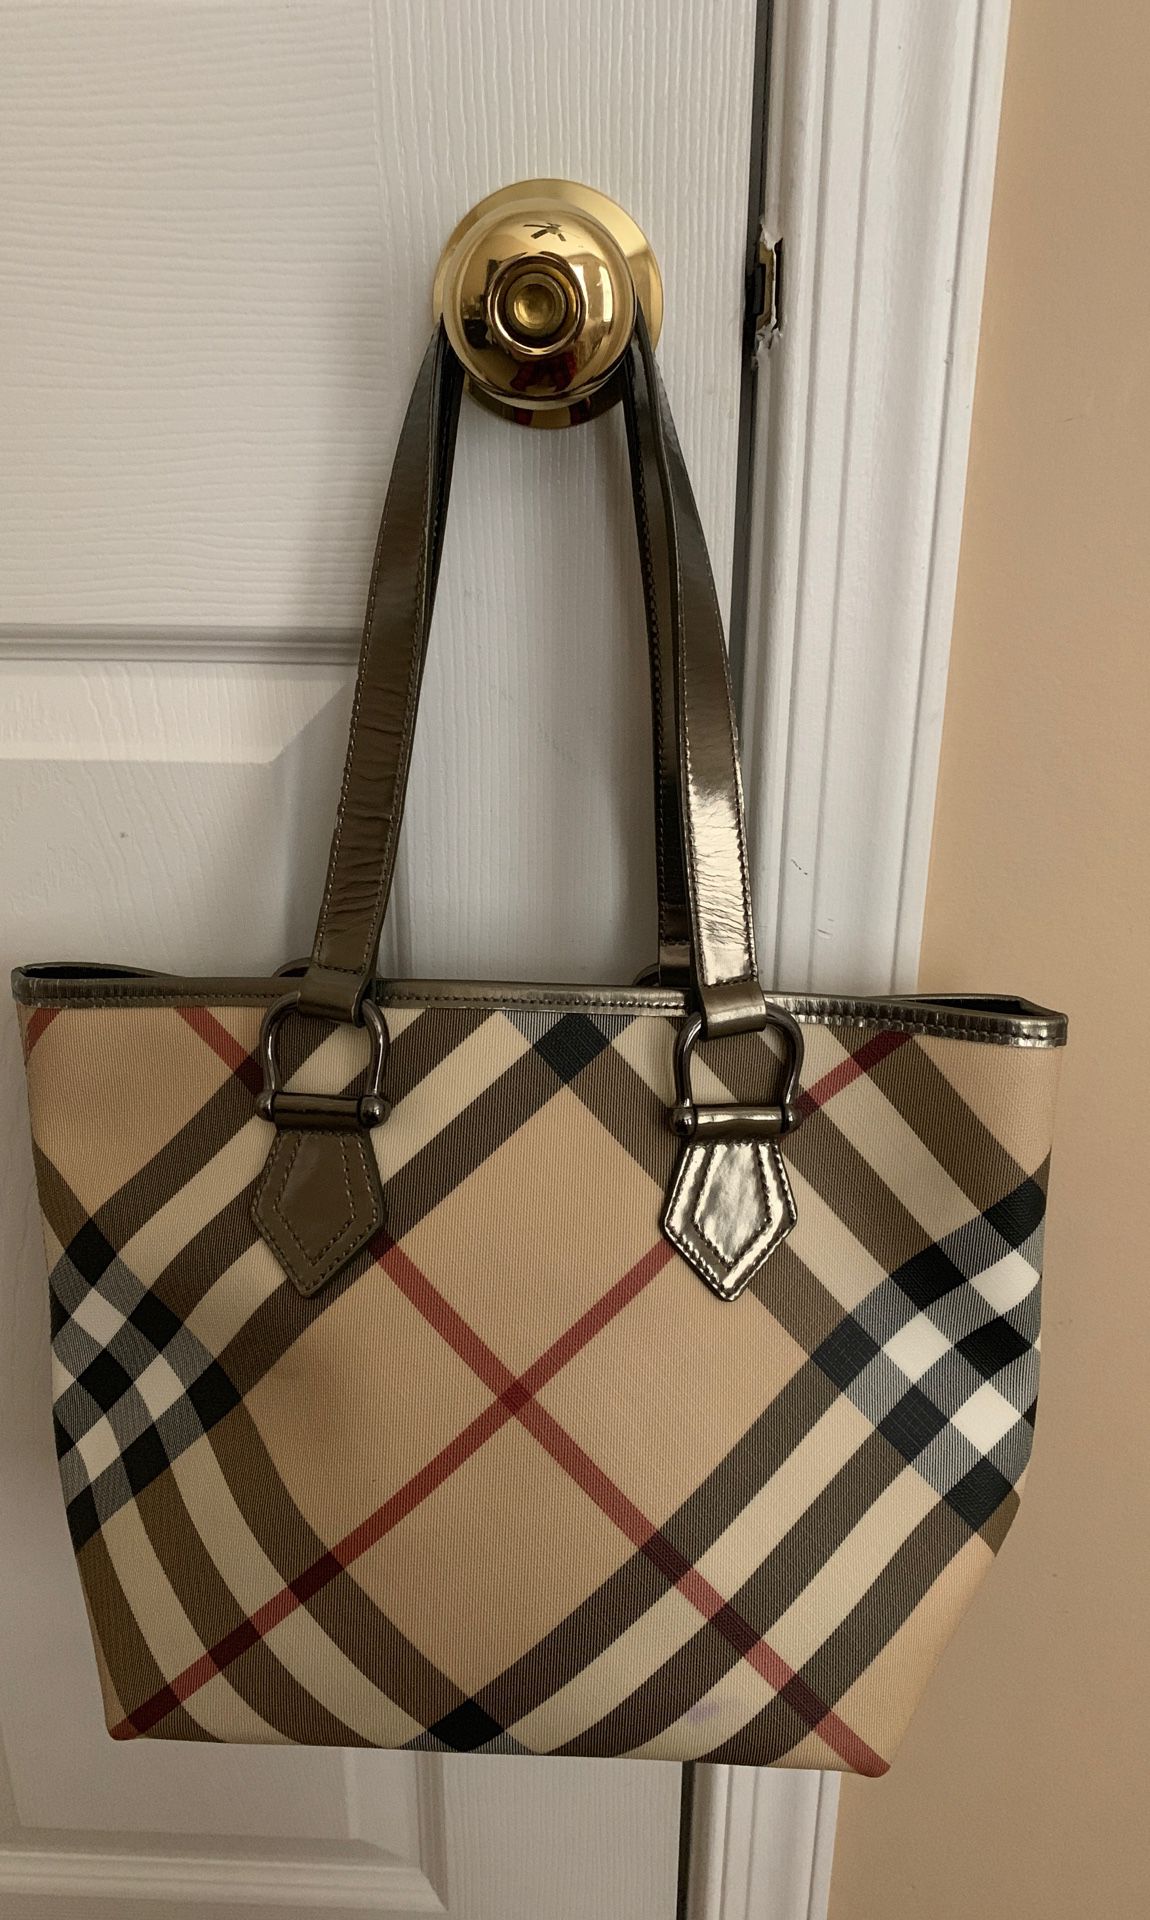 Used Authentic Burberry Shopper bag.